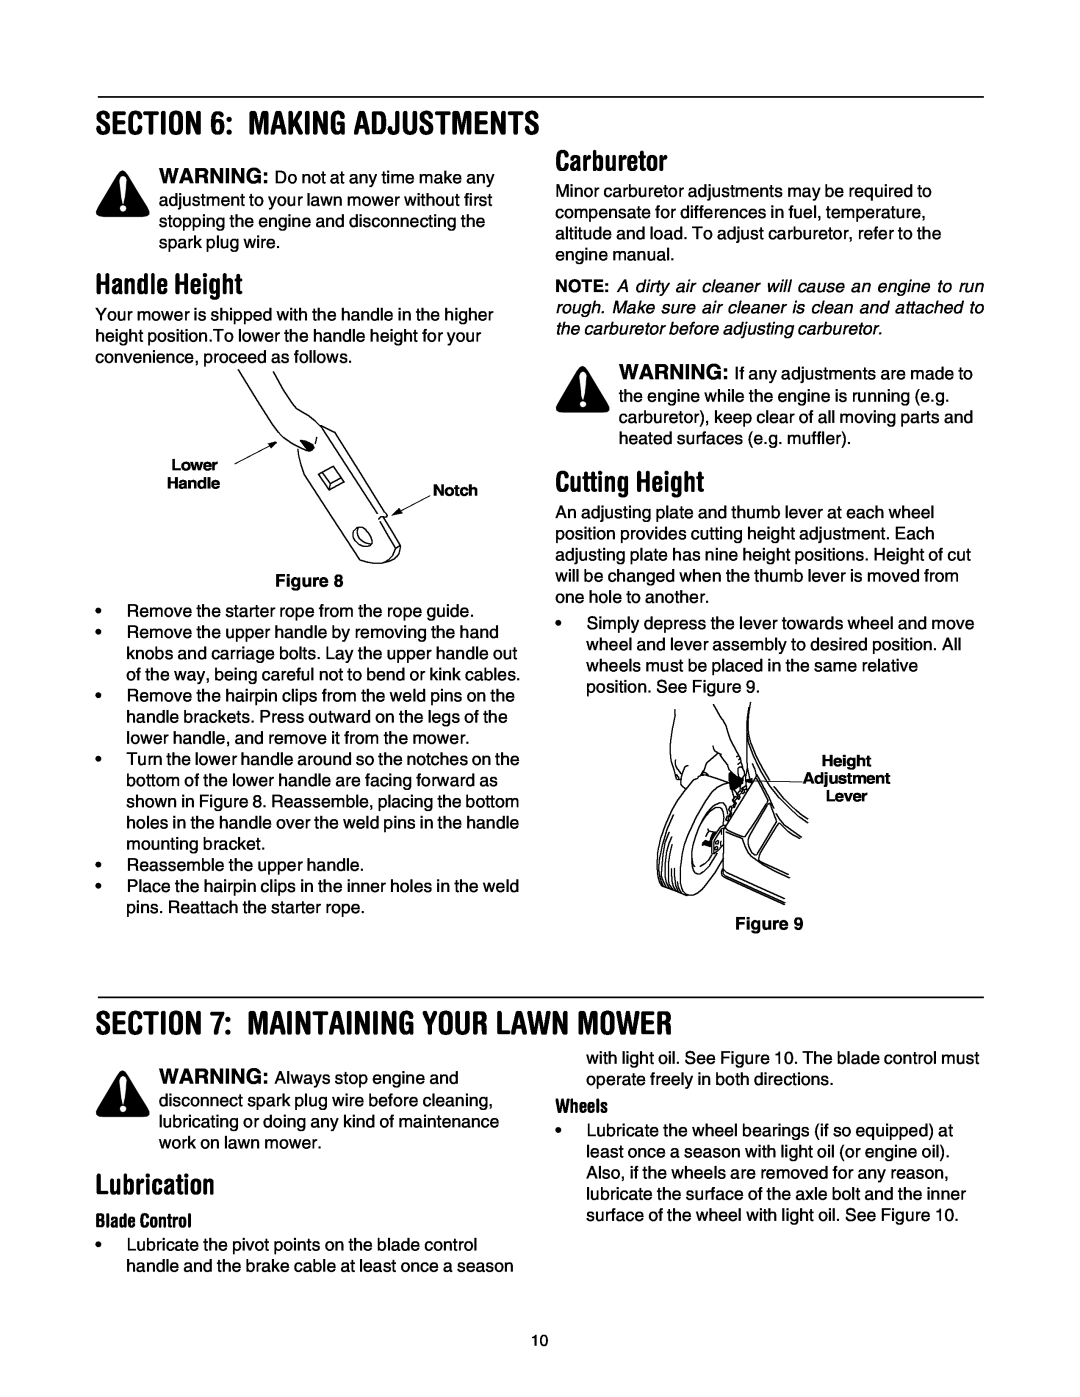 Yard-Man 573 manual Maintaining Your Lawn Mower, Handle Height, Carburetor, Cutting Height, Lubrication, Making Adjustments 